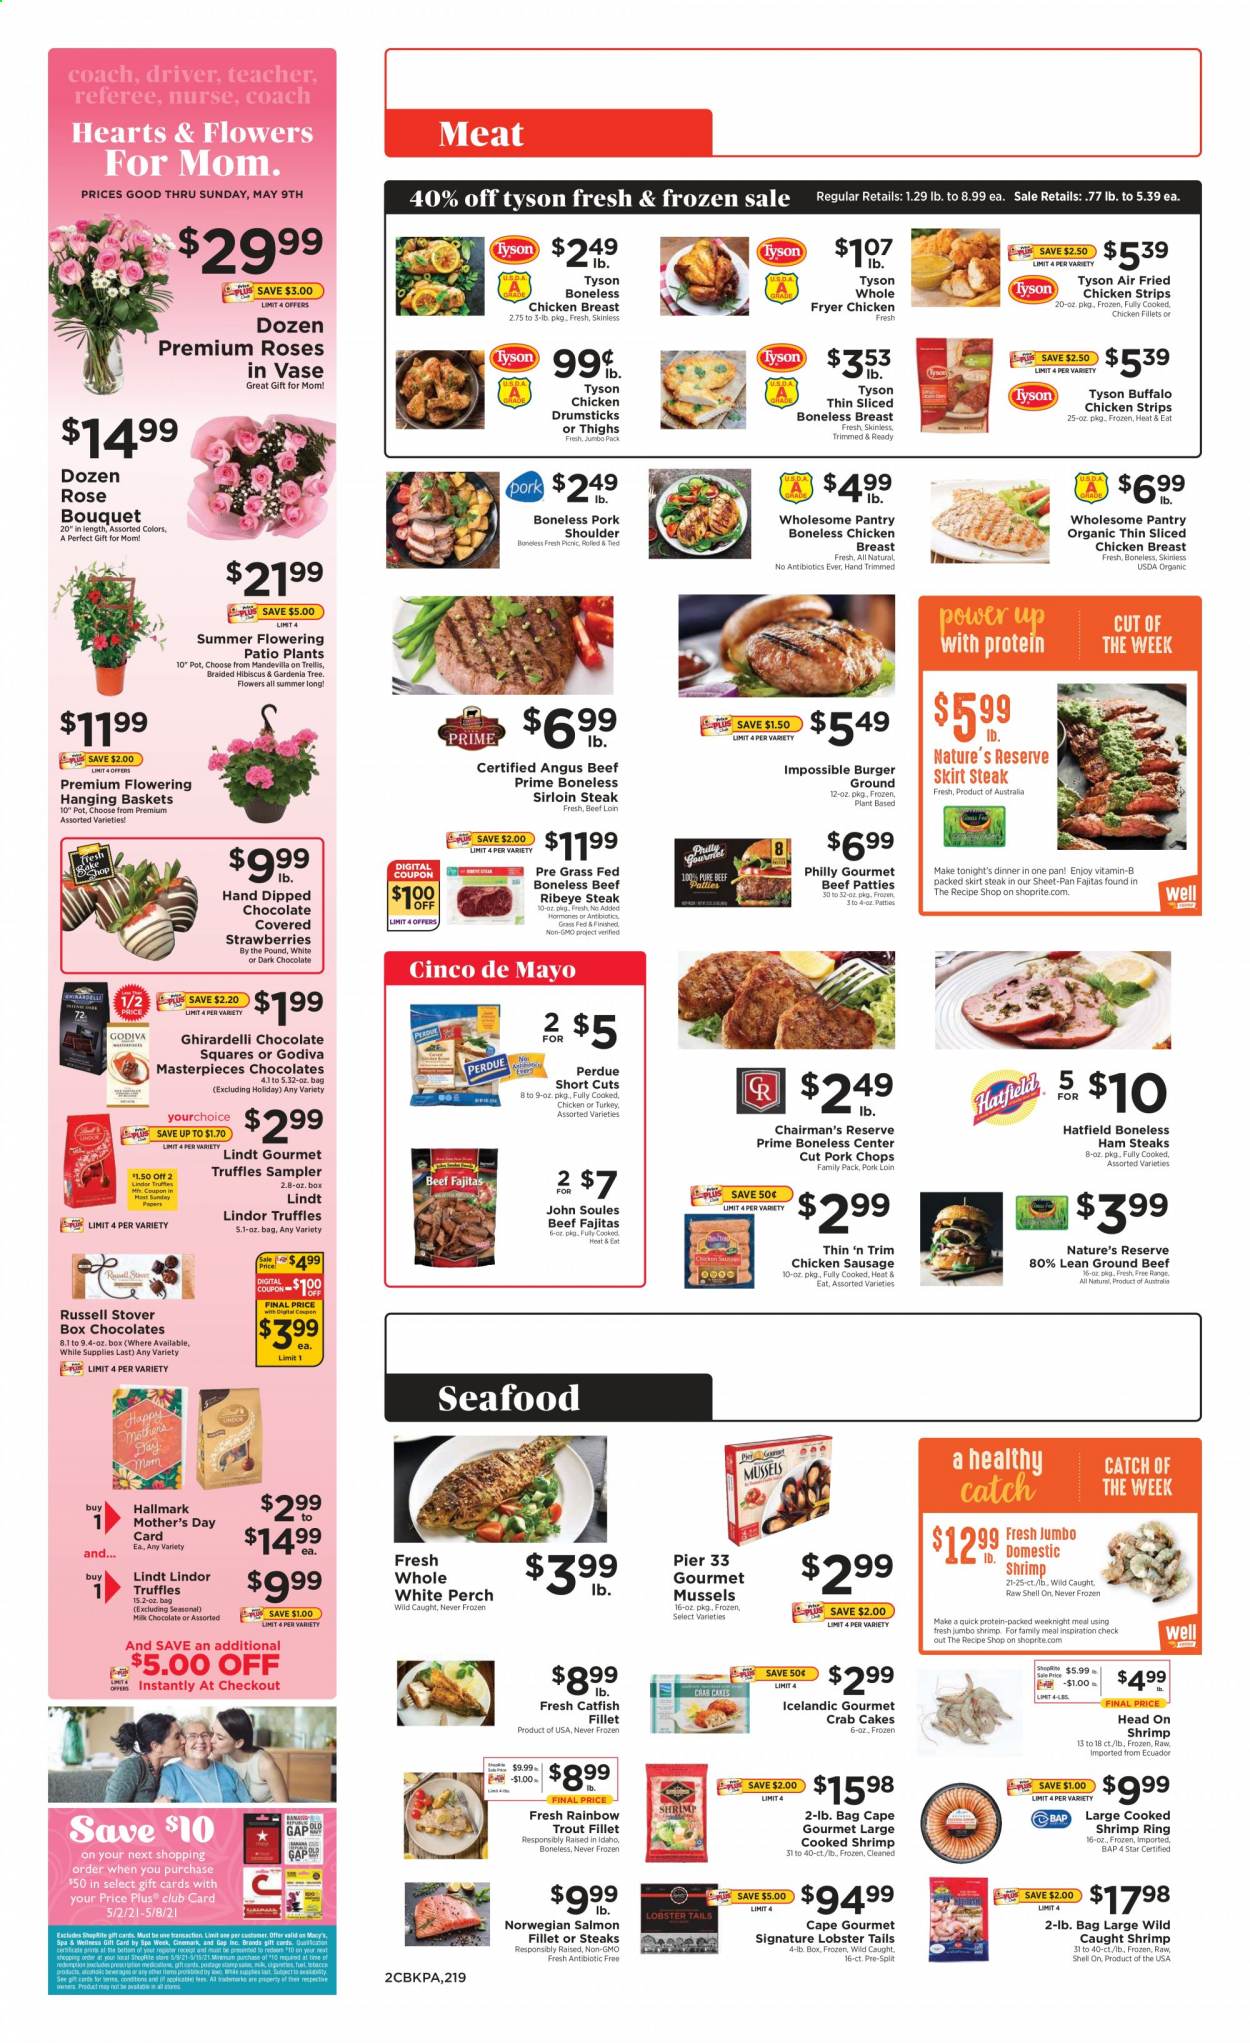 thumbnail - ShopRite Flyer - 05/02/2021 - 05/08/2021 - Sales products - strawberries, lobster, mussels, salmon, salmon fillet, trout, perch, seafood, lobster tail, shrimps, crab cake, hamburger, fried chicken, fajita, Perdue®, ham, sausage, chicken sausage, ham steaks, strips, chicken strips, milk chocolate, Lindt, Lindor, Godiva, Ghirardelli, wine, rosé wine, chicken breasts, chicken drumsticks, beef meat, beef sirloin, beef steak, ground beef, steak, sirloin steak, ribeye steak, pork chops, pork loin, pork meat, pork shoulder, pot, pan, bouquet, rose. Page 2.